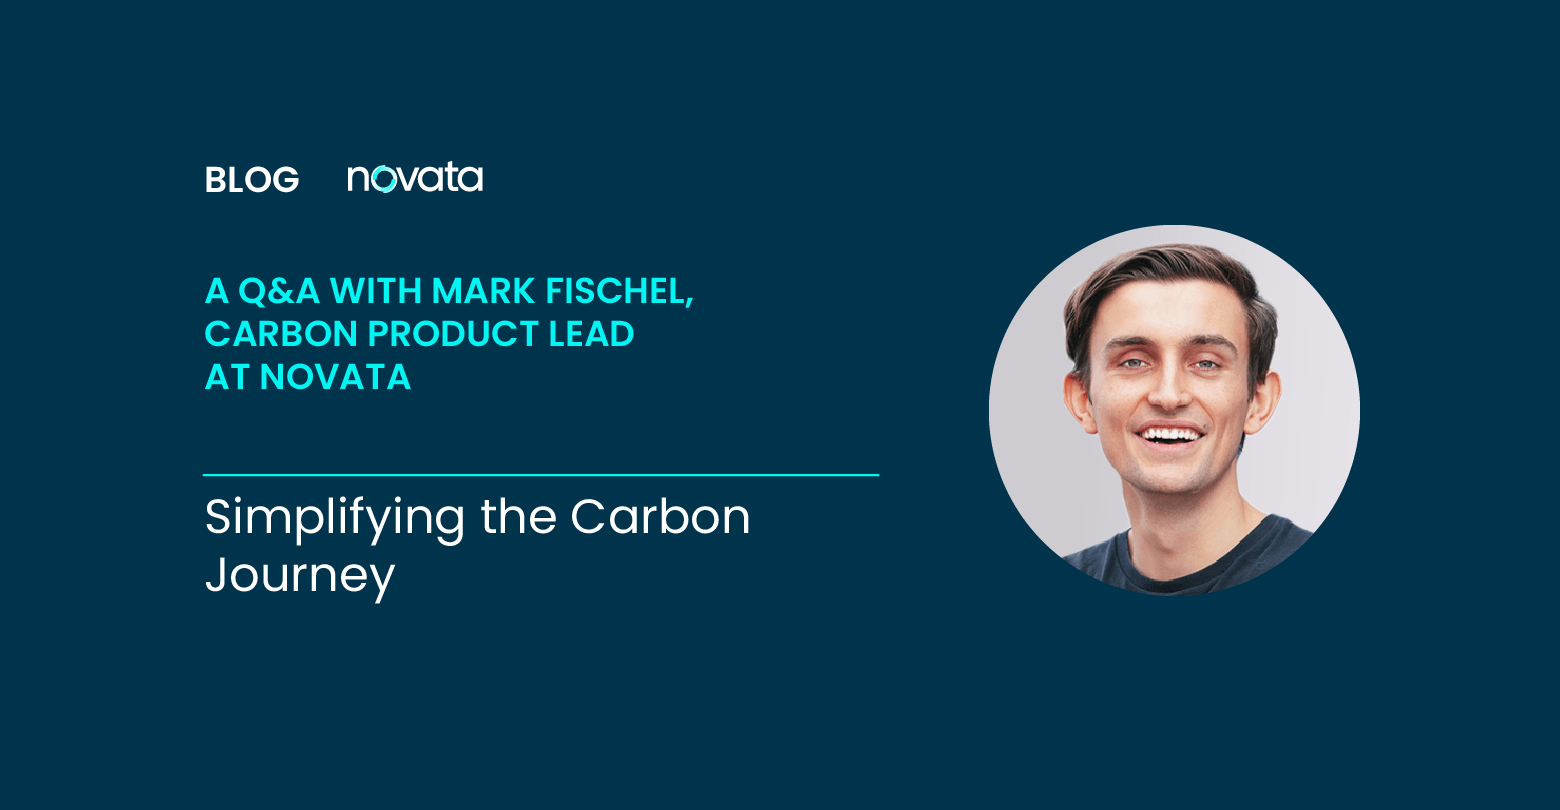 Novata Q&A with Mark Fischel, Carbon Product Lead at Novata. Simplifying the Carbon Journey